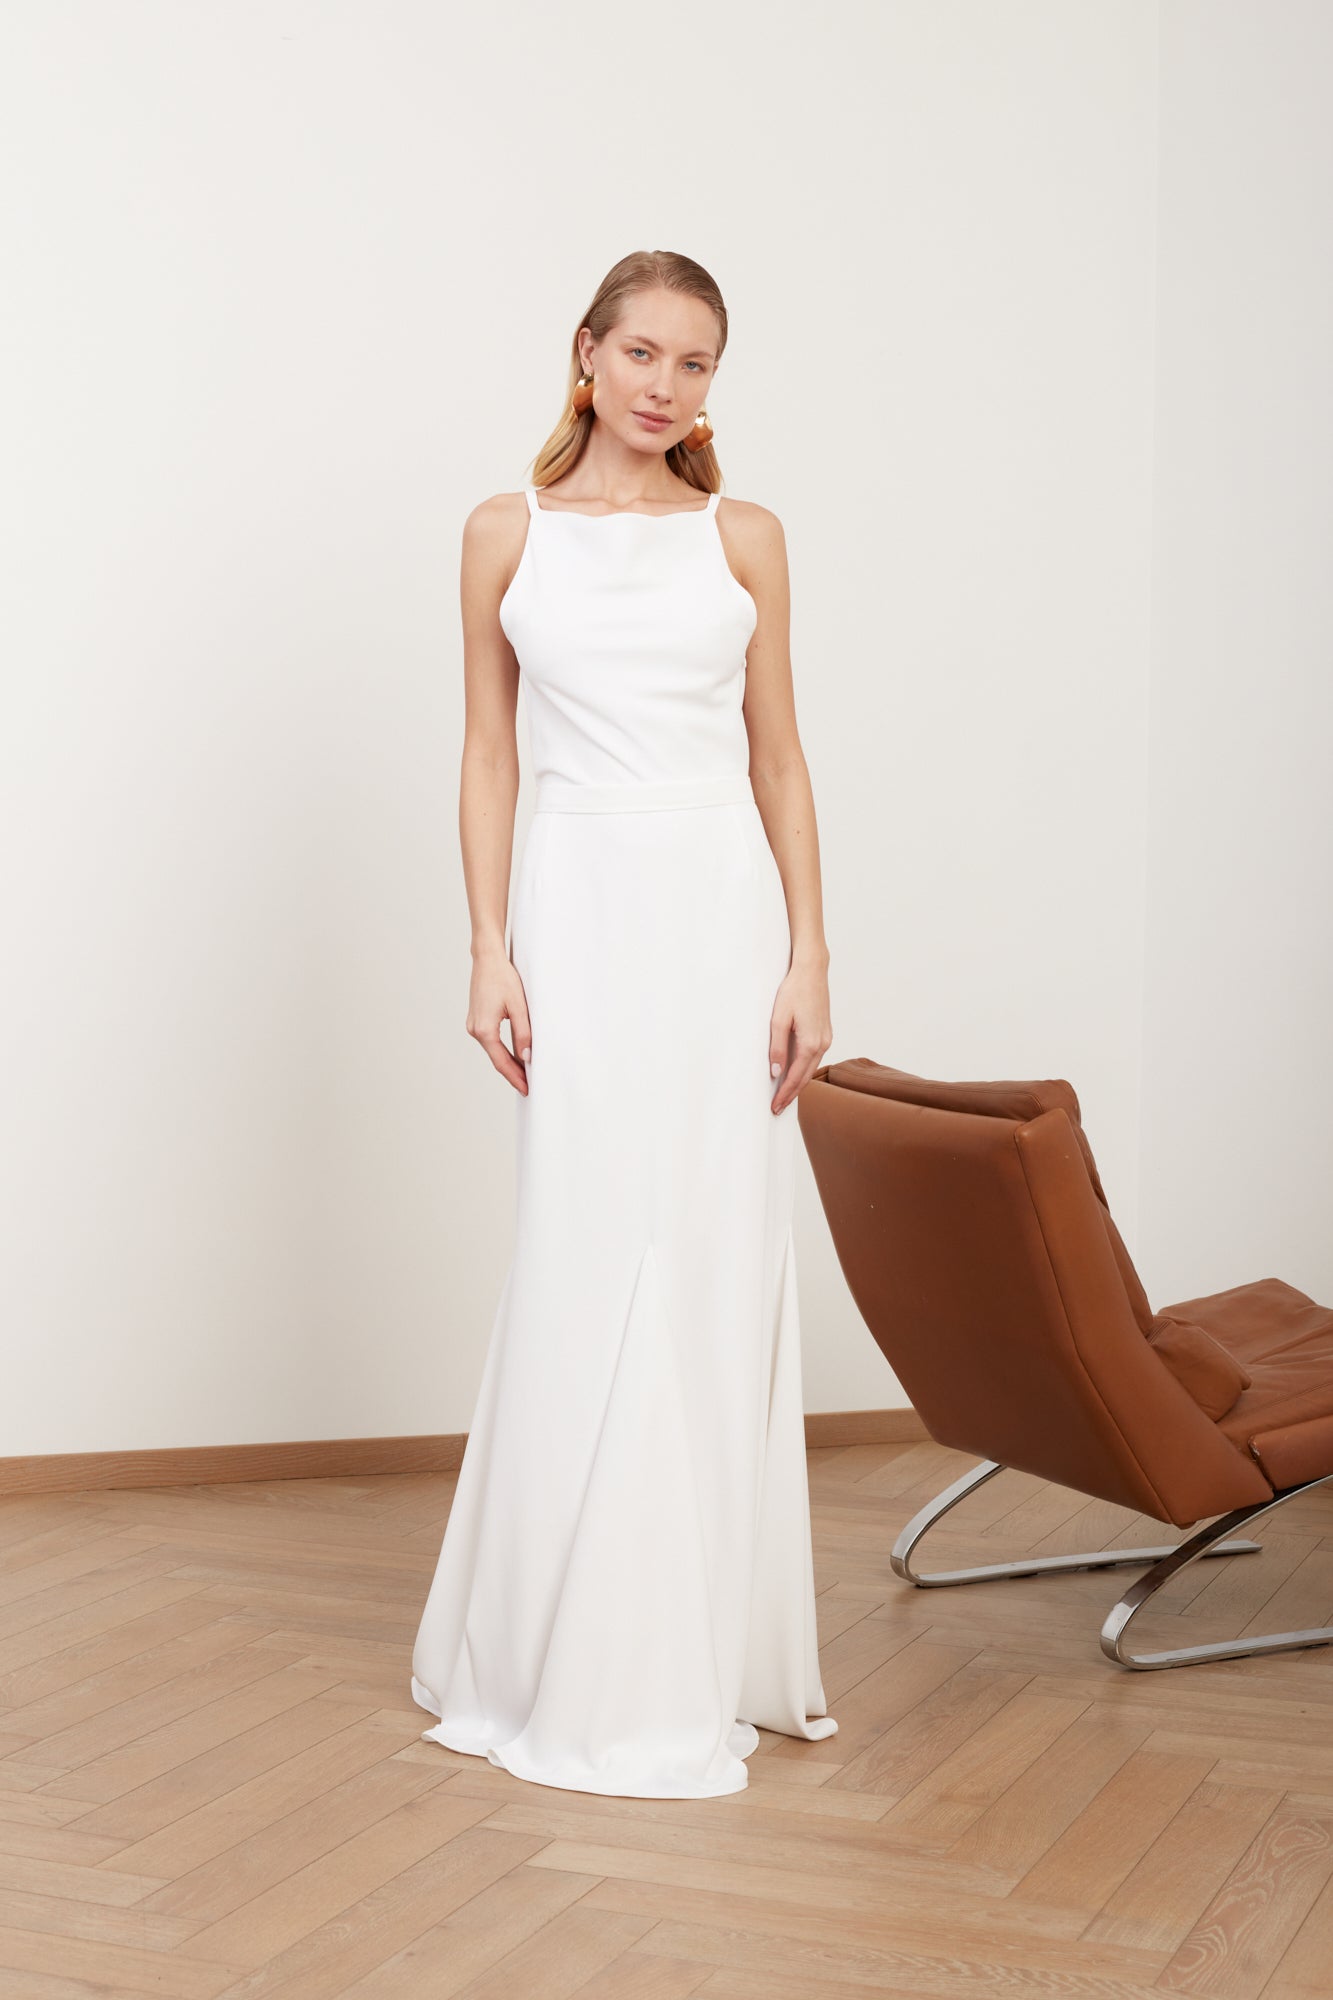 LINEA white long wedding dress with cowl back